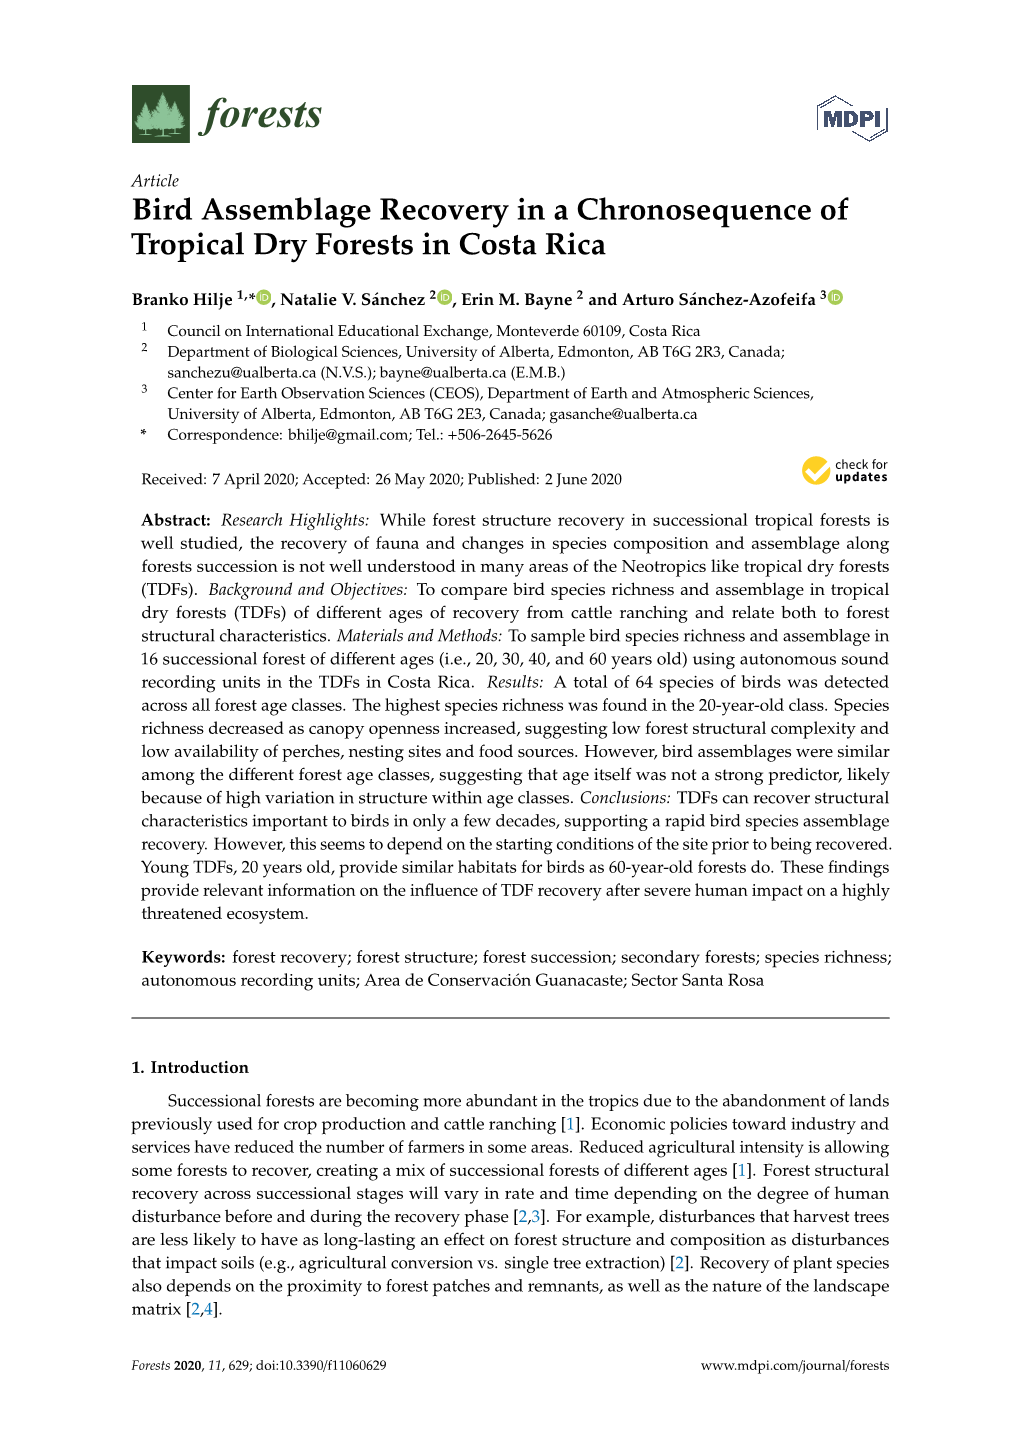 Bird Assemblage Recovery in a Chronosequence of Tropical Dry Forests in Costa Rica